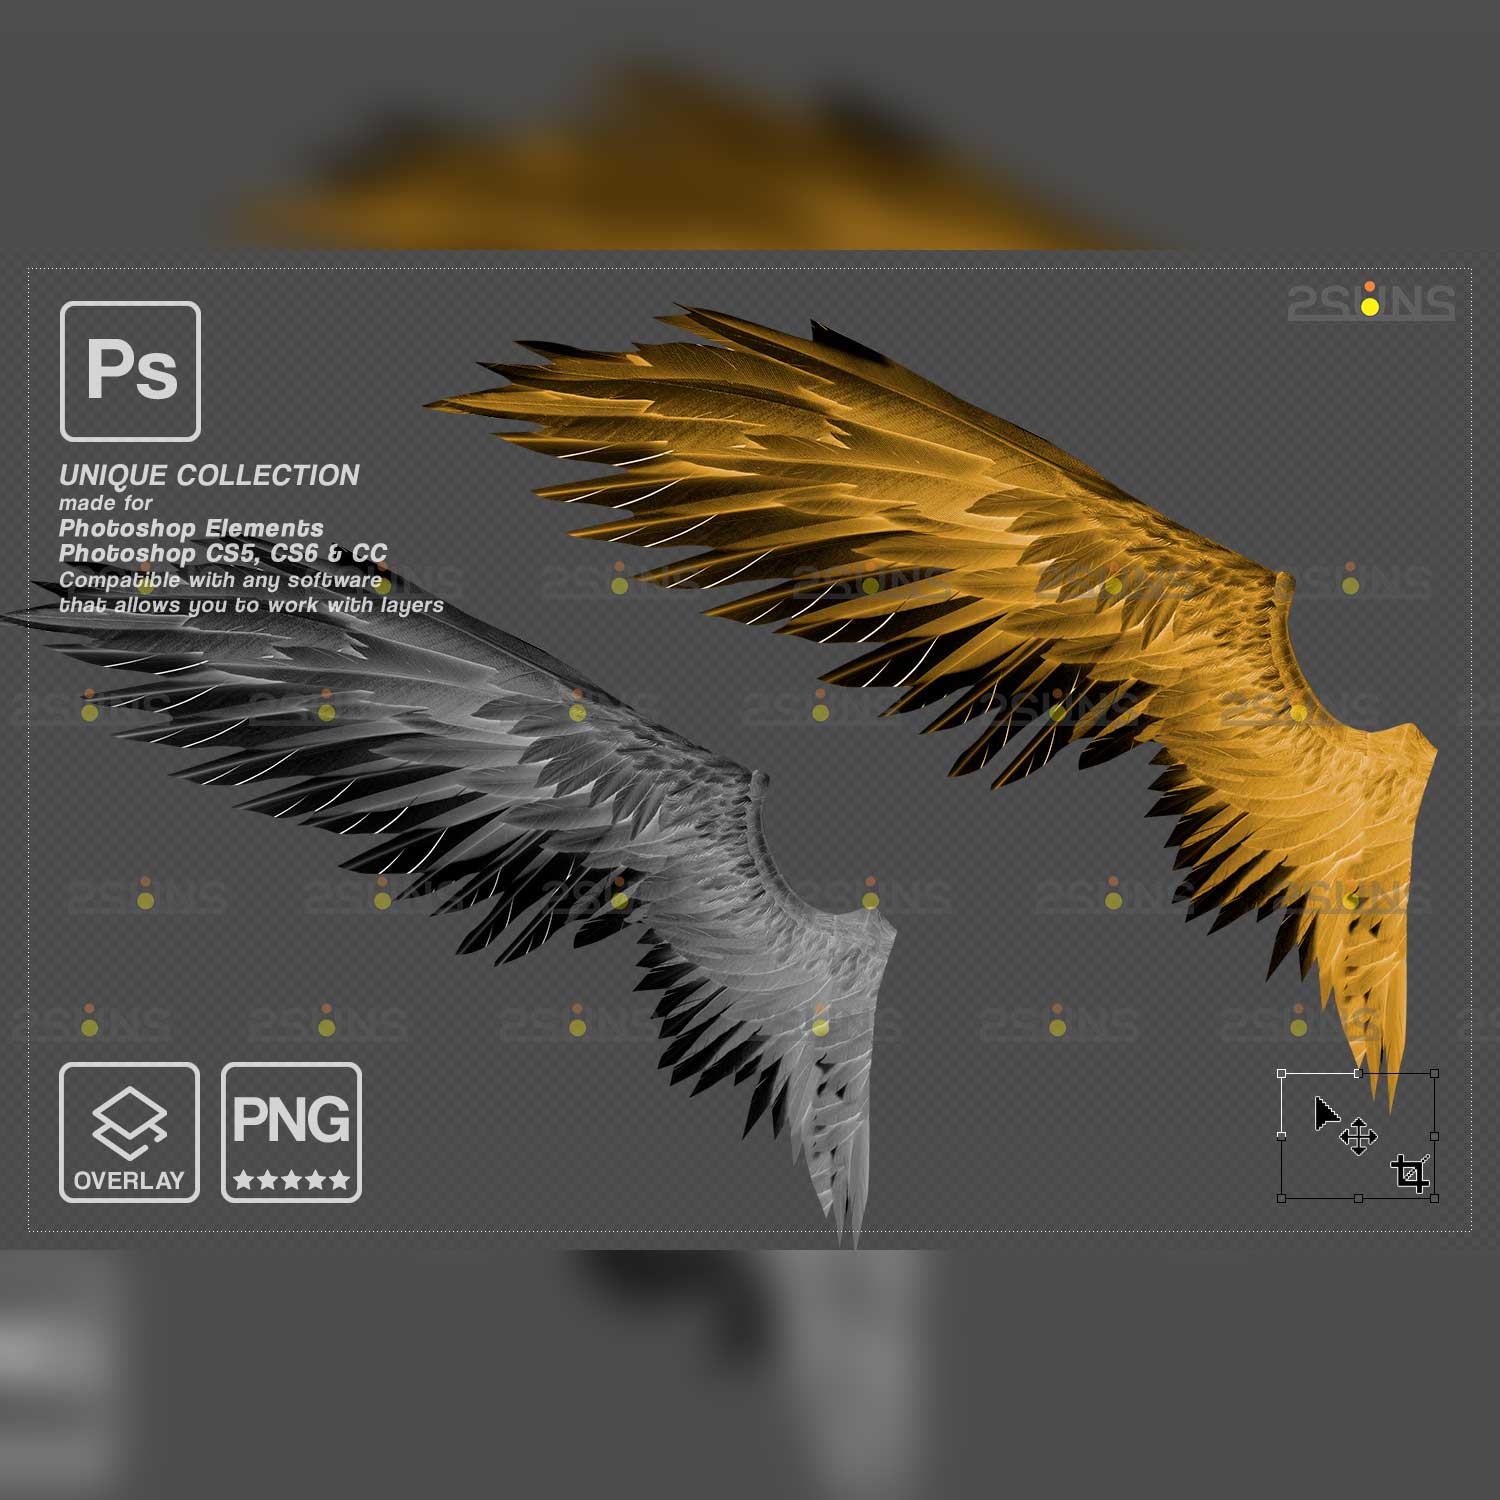 Realistic Black White Gold Angel Wings Photoshop Overlays Gold and grey wings.